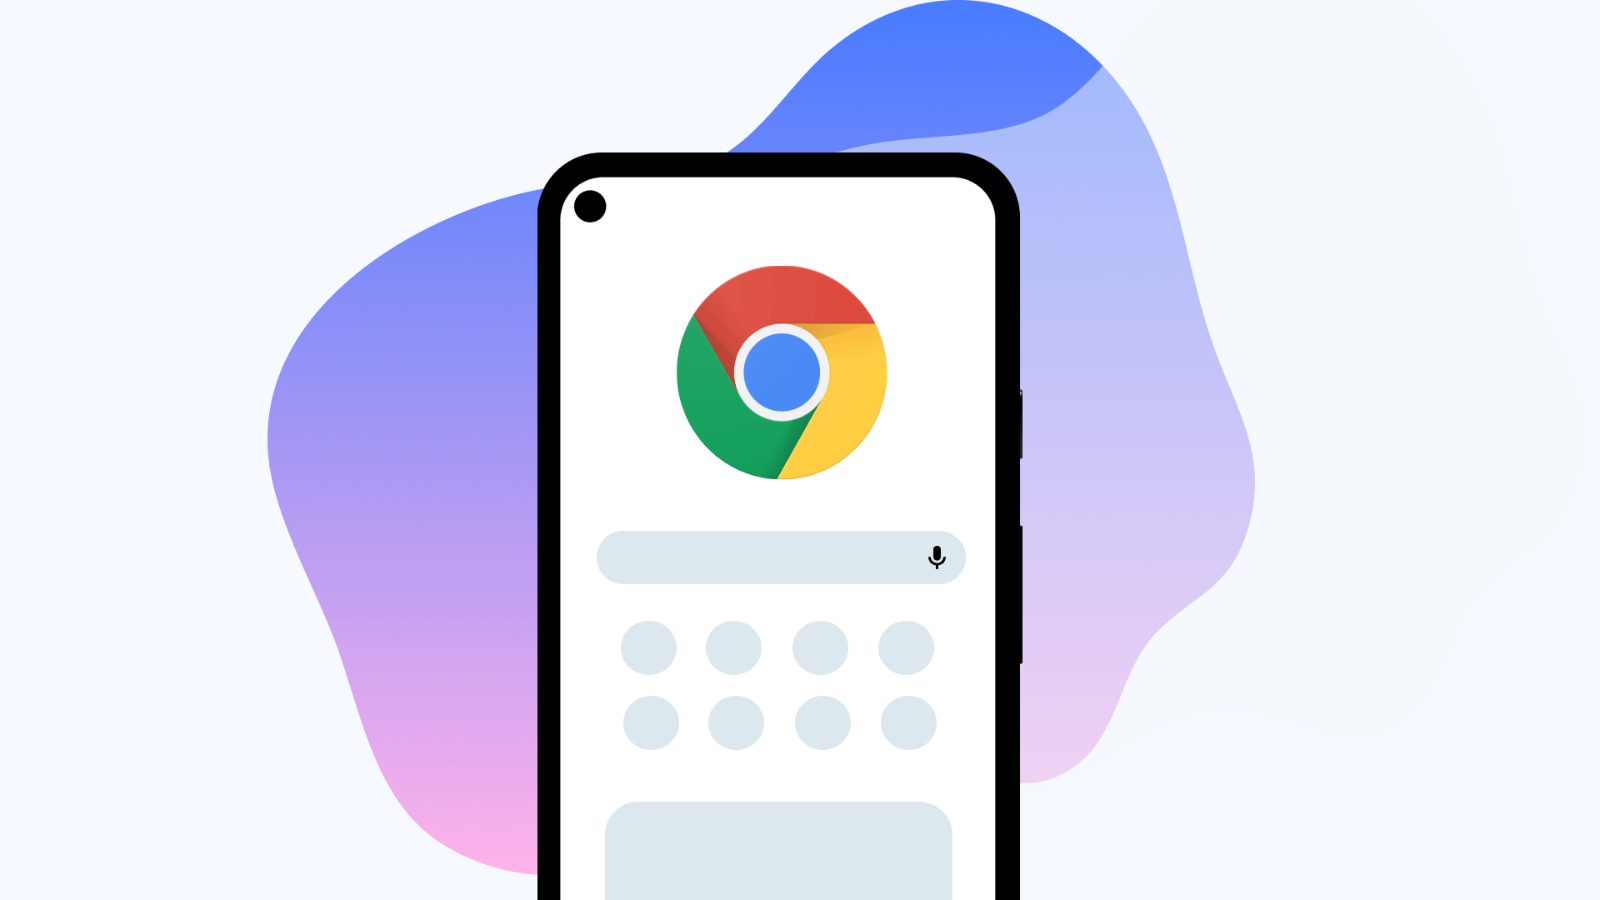 Chrome 94 Material You Android 12